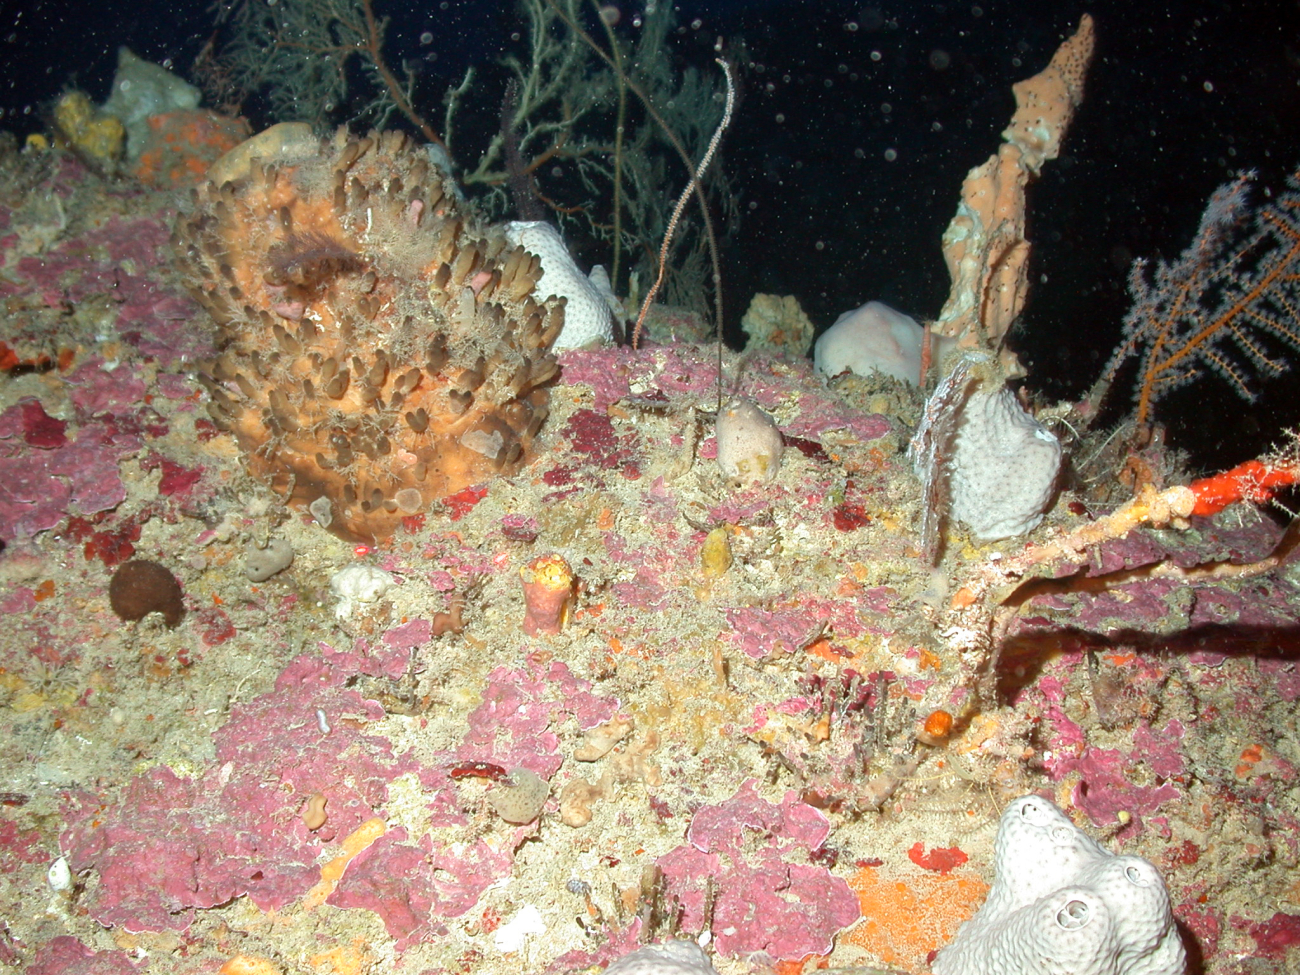 A variety of sponges and corals on a rock outcrop during night observations